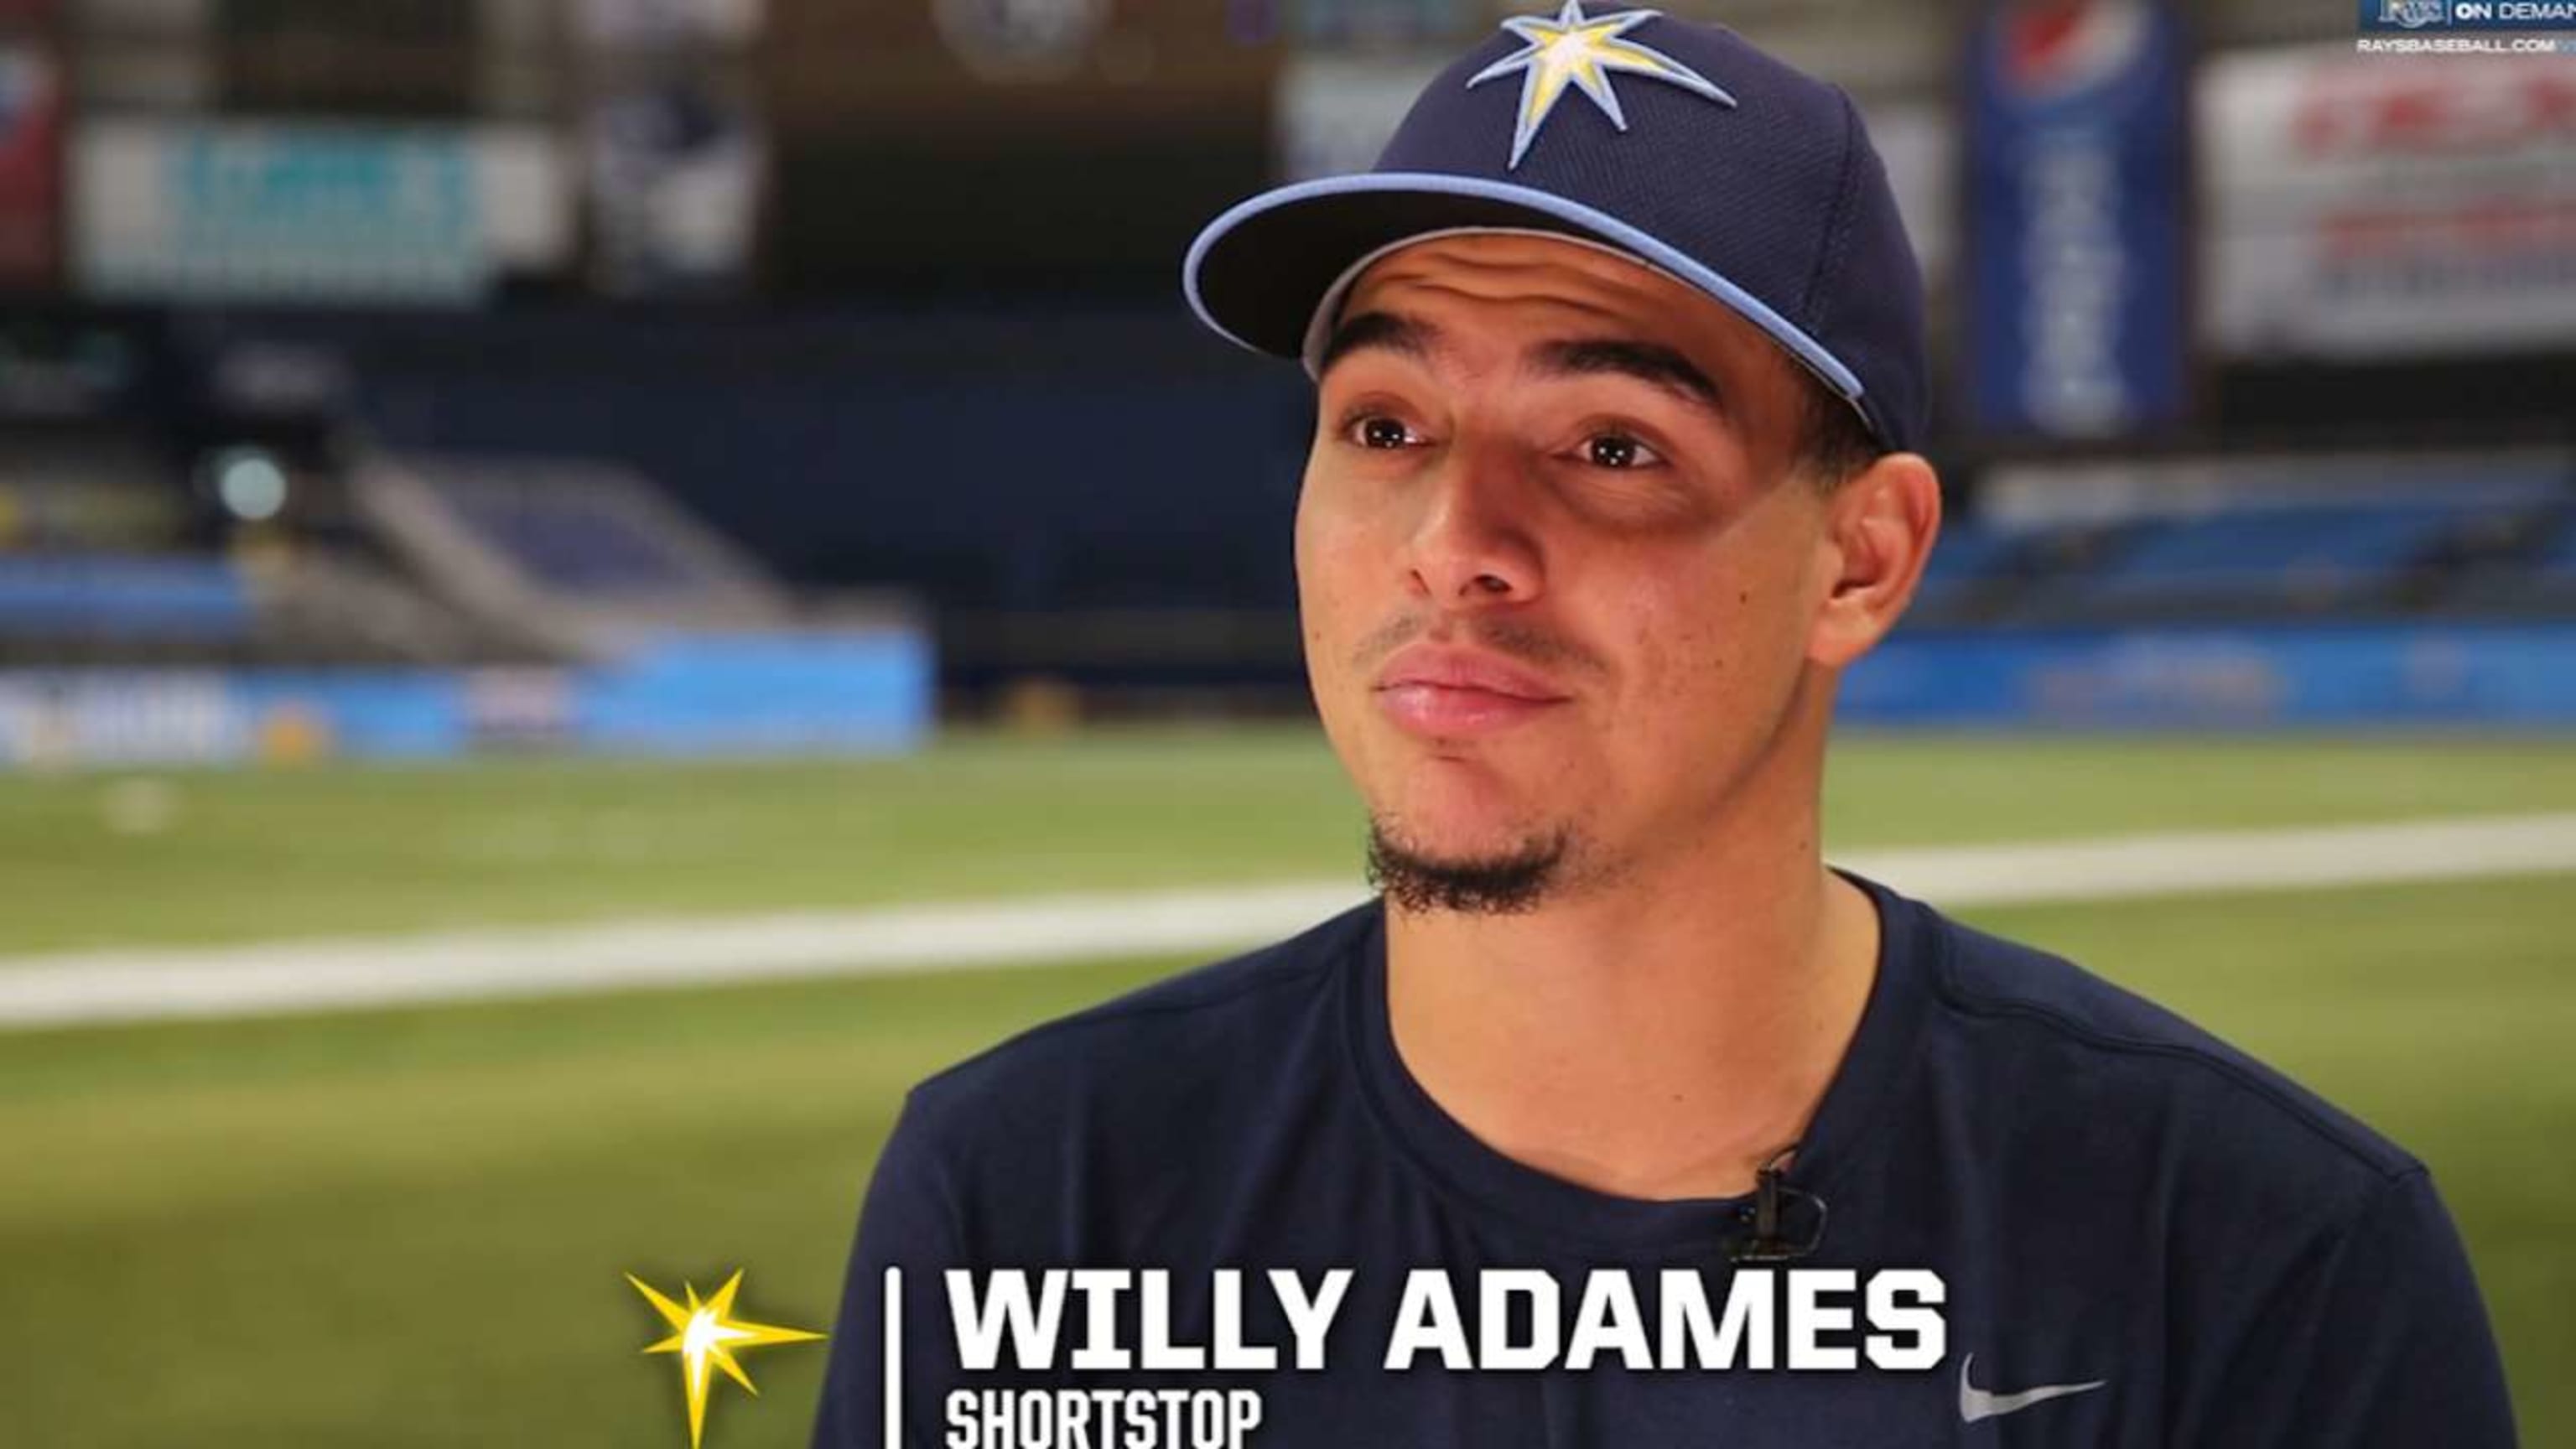 Top Rays prospect Willy Adames sent to Minors